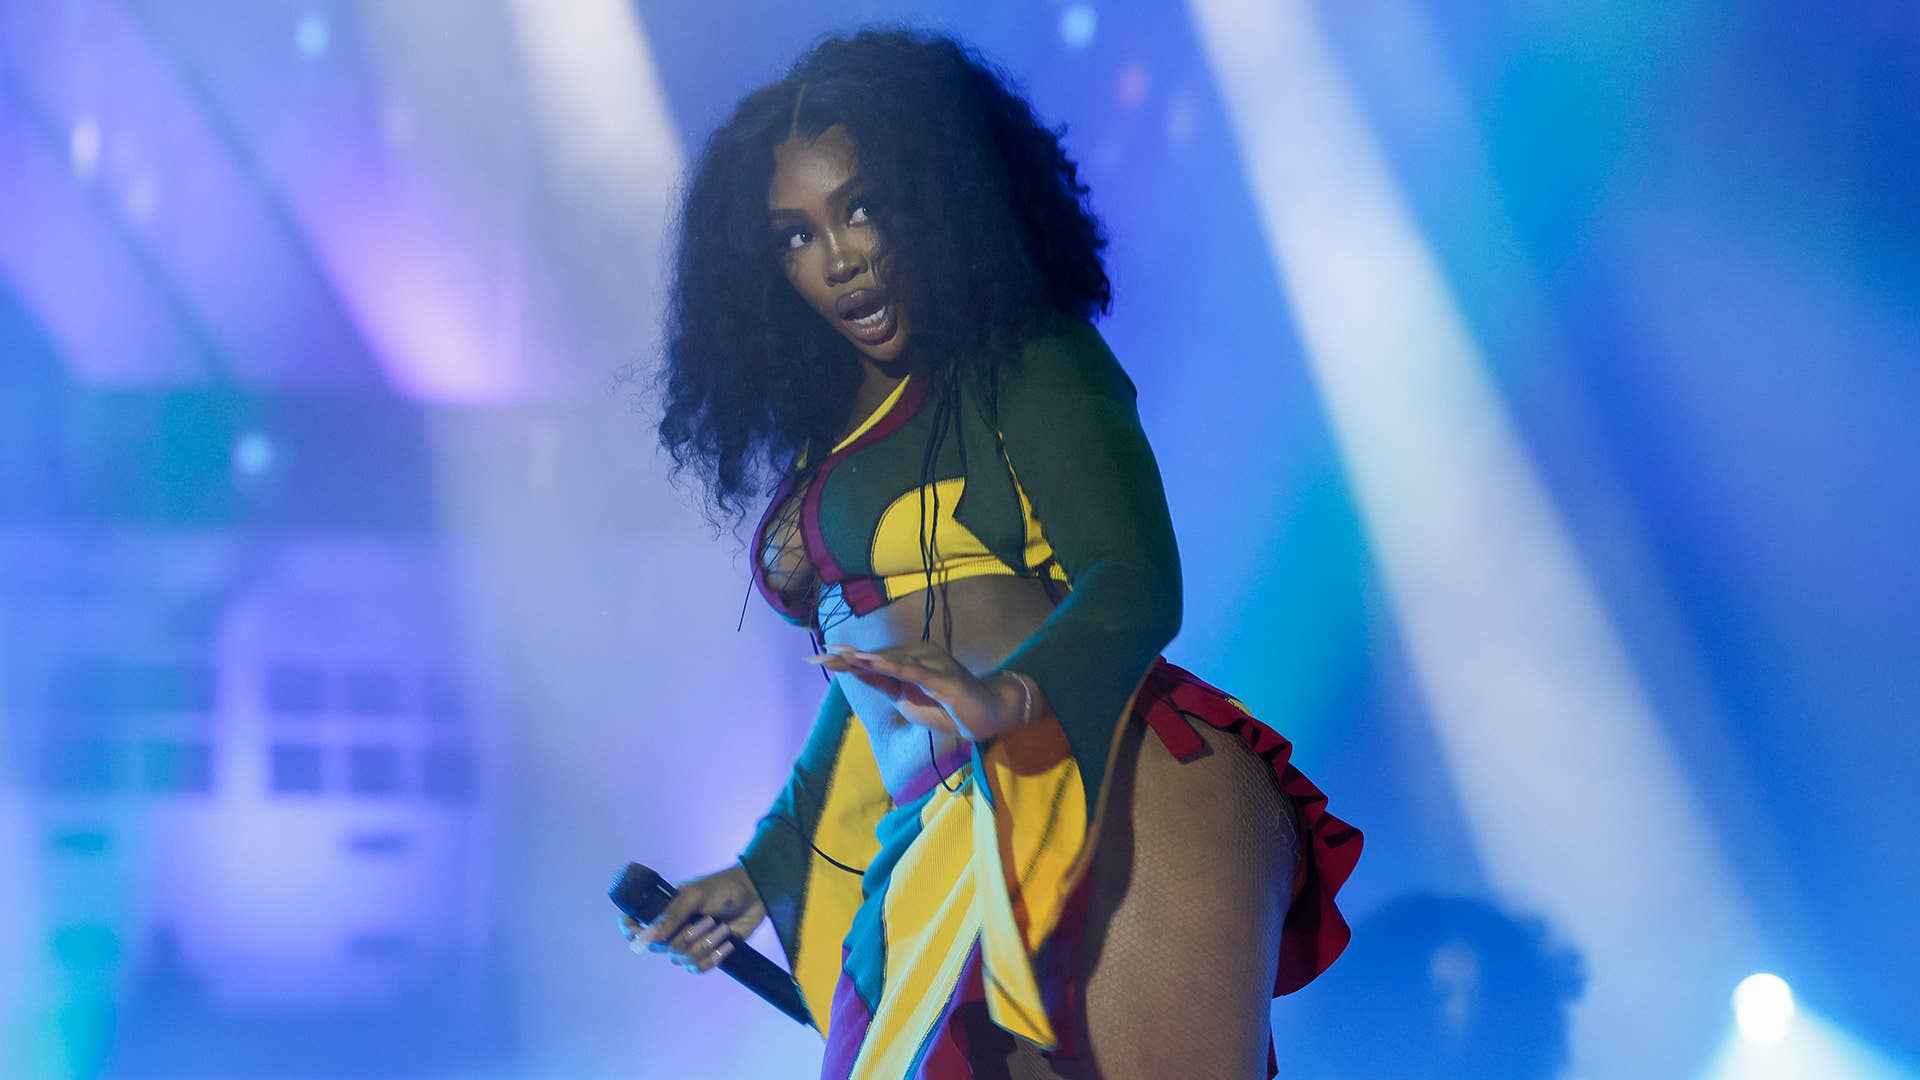 Sza performs on stage during Global Citizen Festival 2022